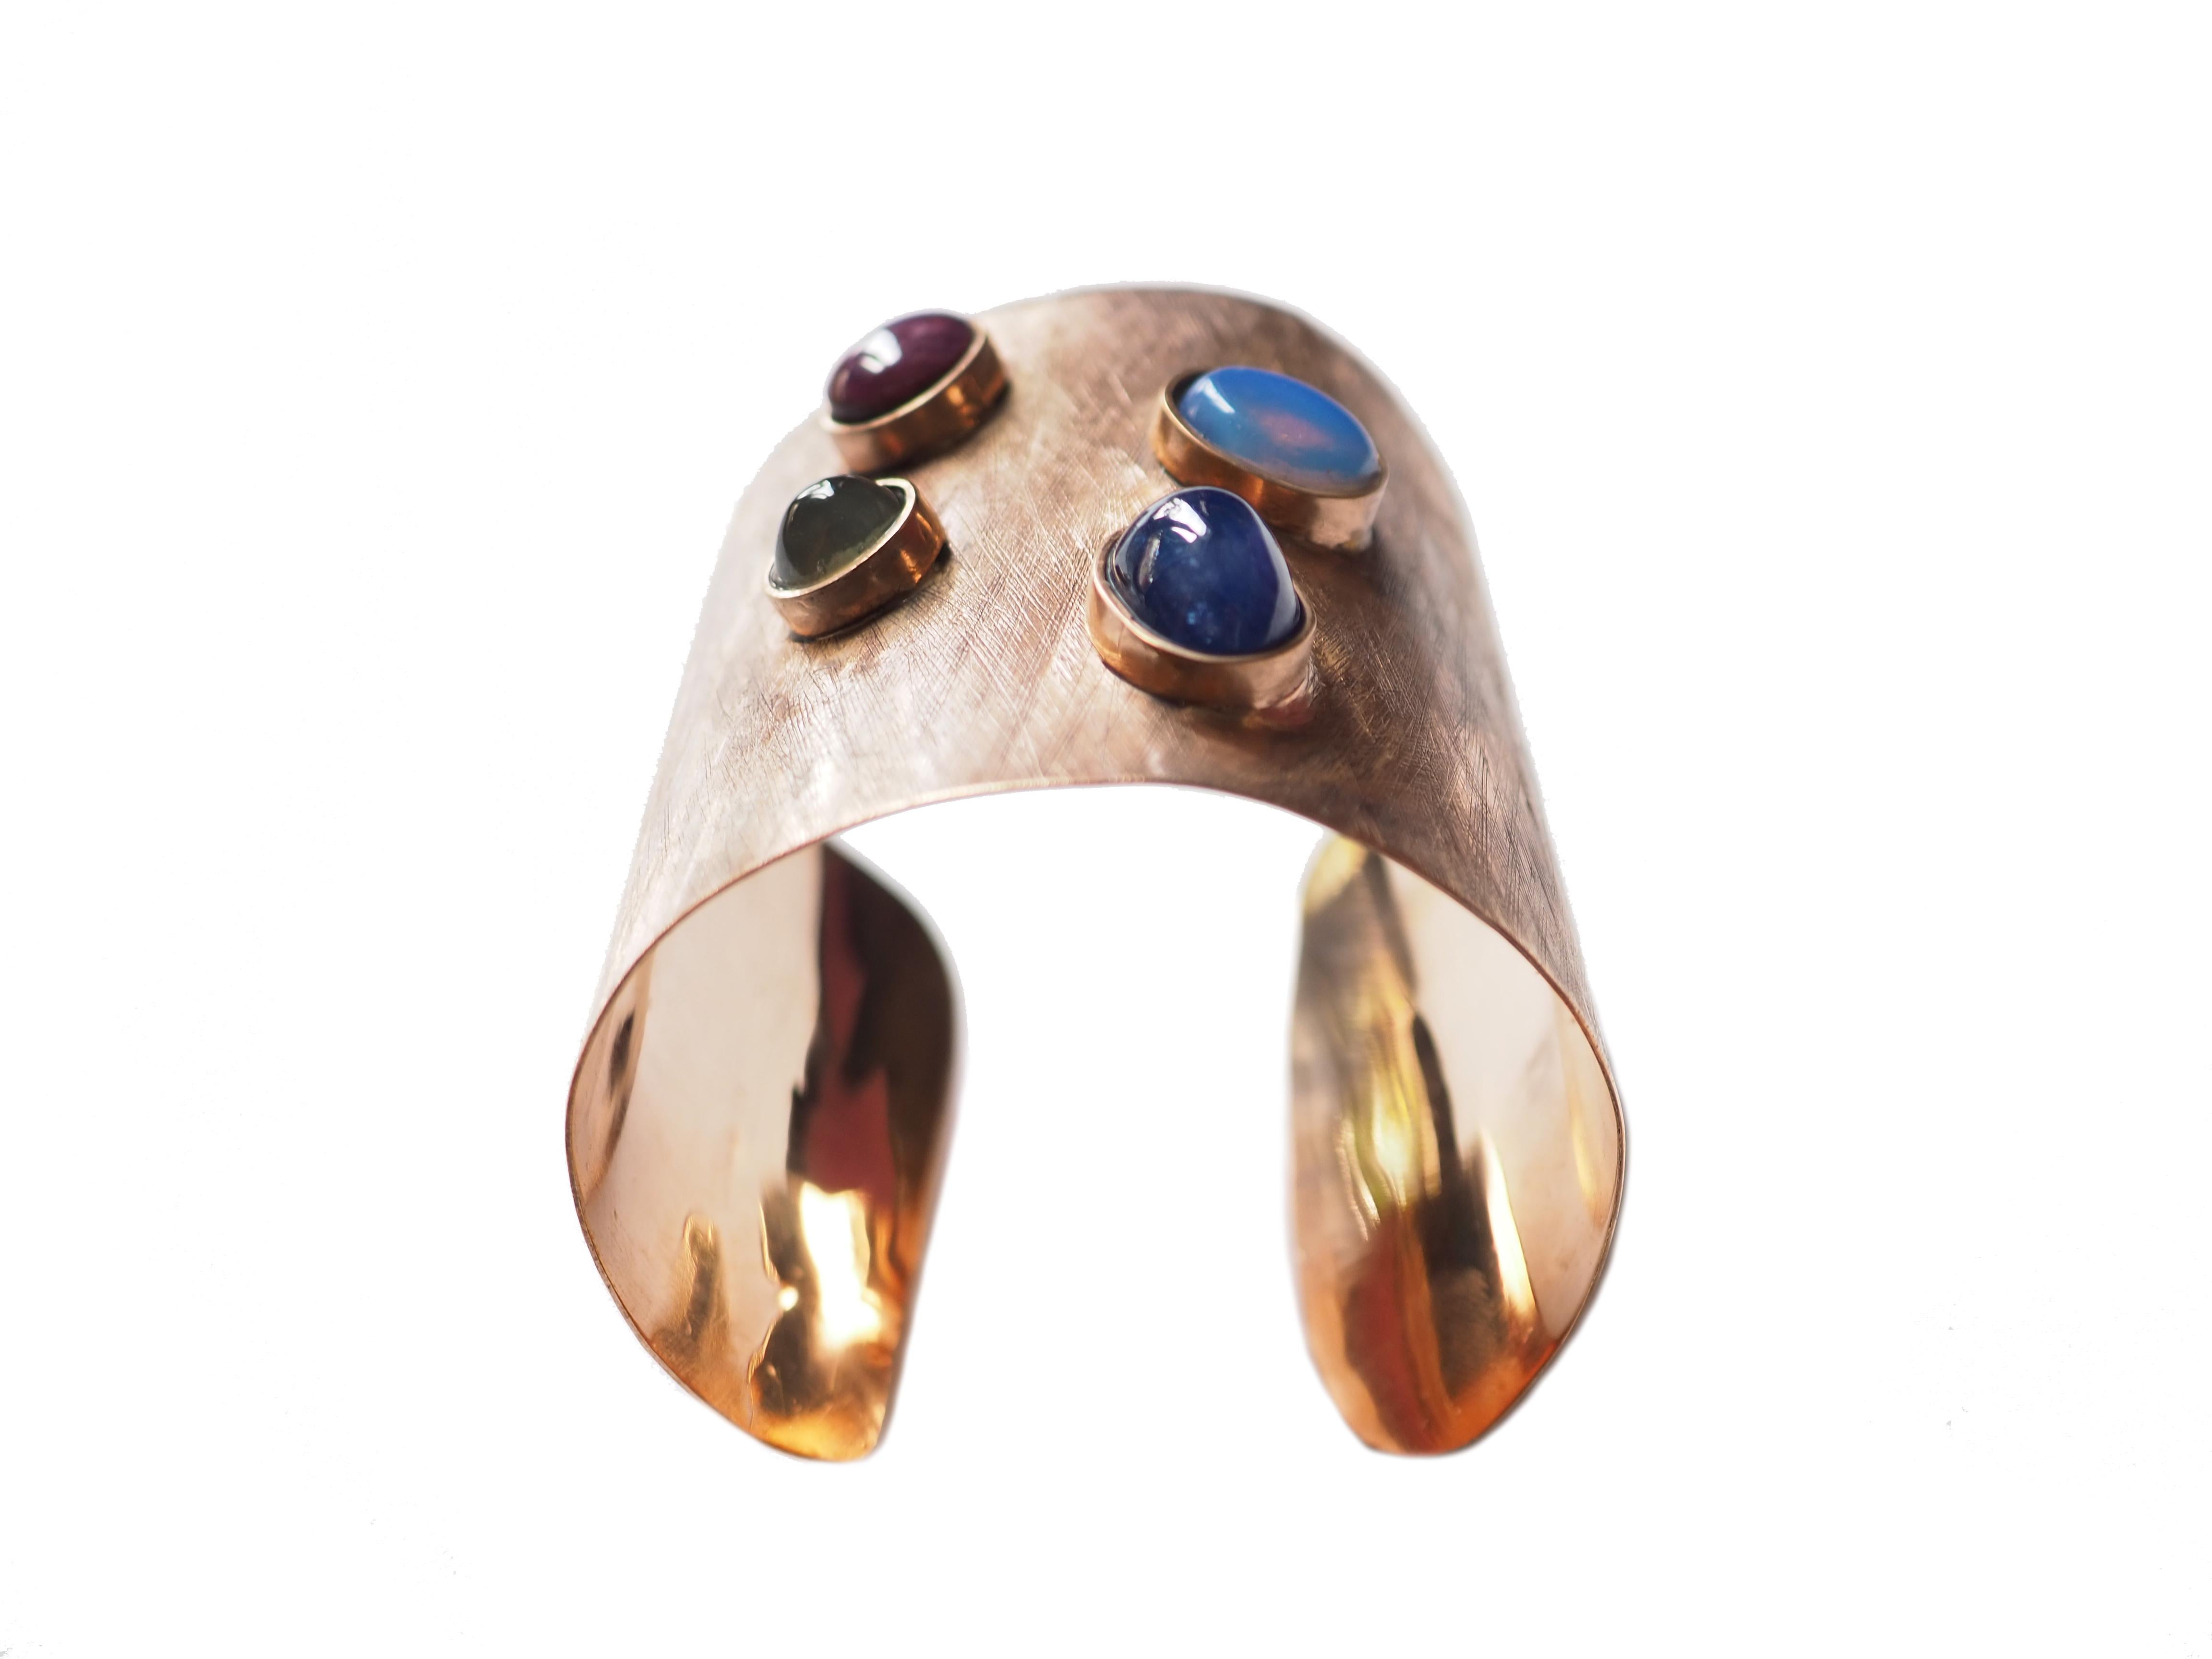 Bronze bangle with  star ruby, opal,  blu sapphire made by hand.
All Giulia Colussi jewelry is new and has never been previously owned or worn. Each item will arrive at your door beautifully gift wrapped in our boxes, put inside an elegant pouch or